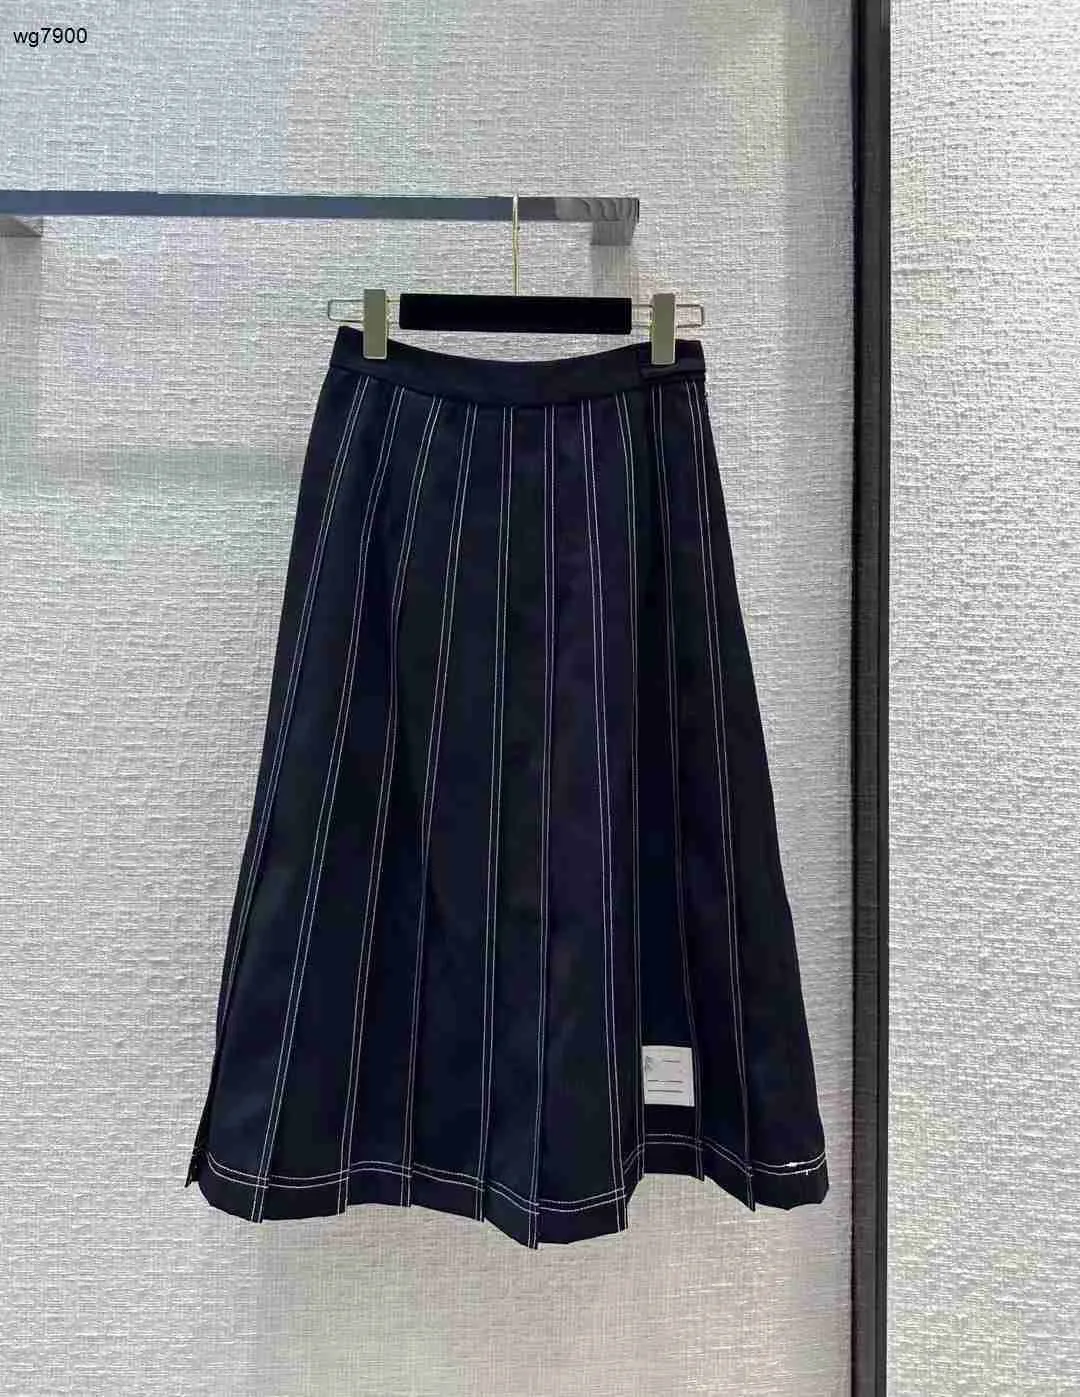 brand women skirt clothing for ladies summer quality high Stripe decoration waist and big swing long overskirt Dec 22